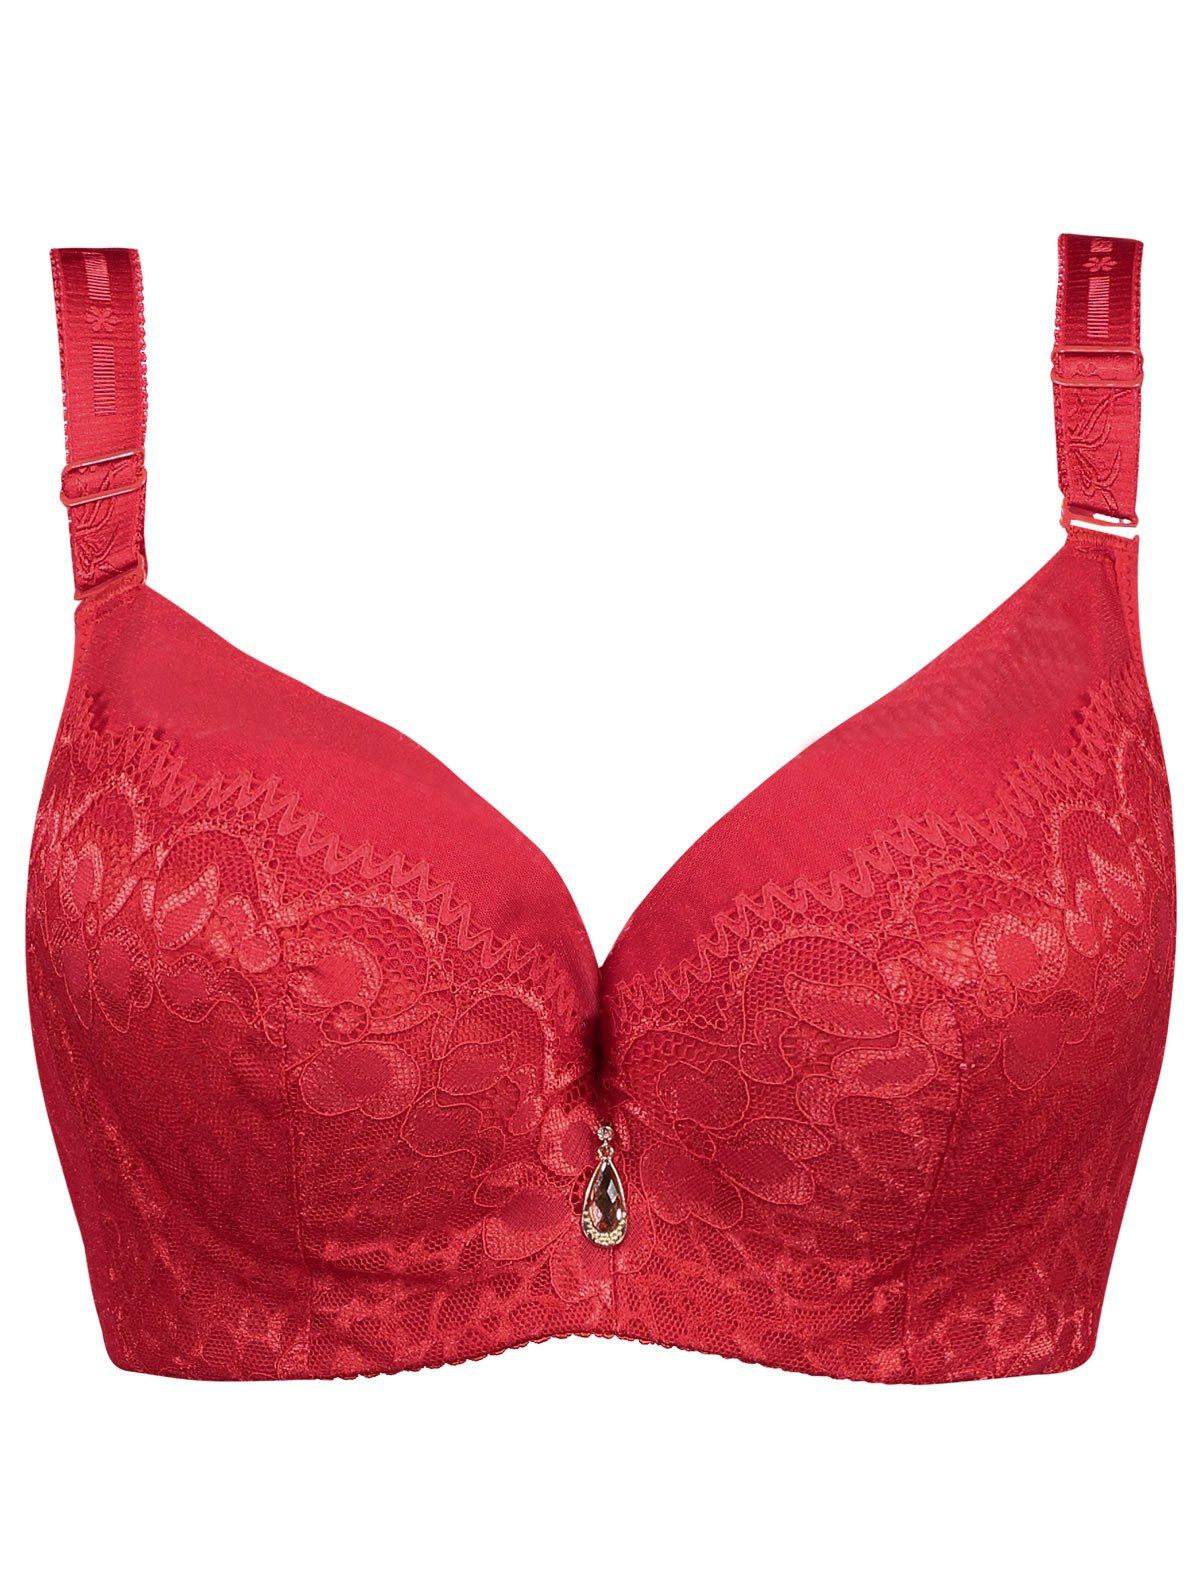 [41% OFF] 2020 Plus Size Flower Lace Padded Underwire Bra In RED ...